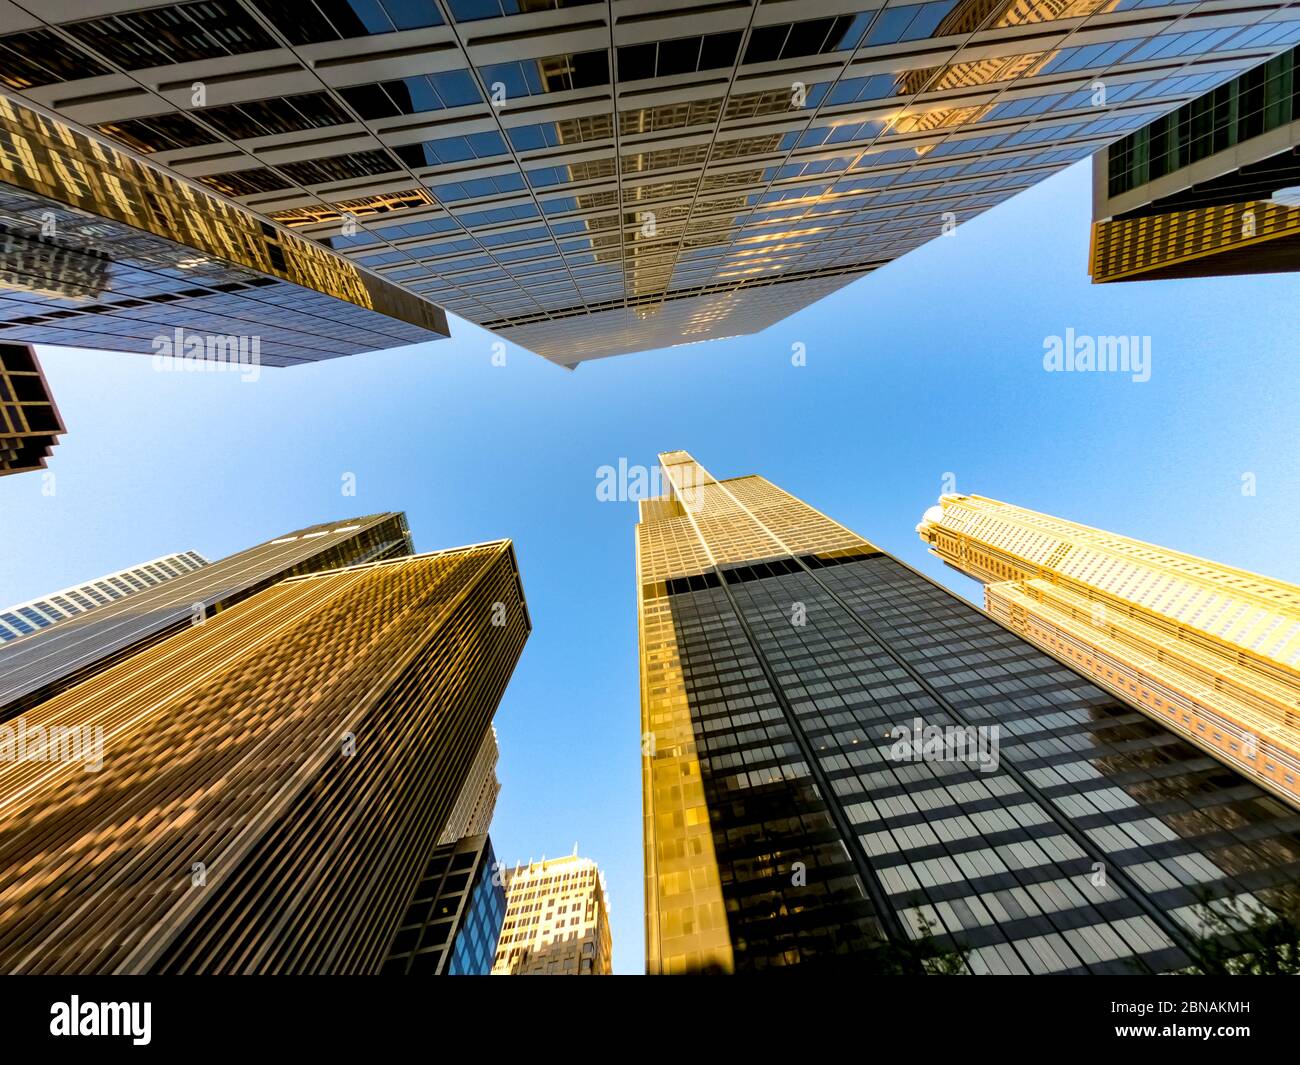 Upward view of chicago skyscrapers and tall office buildings.  Showcasing various architectural styles. Illinois usa. Stock Photo